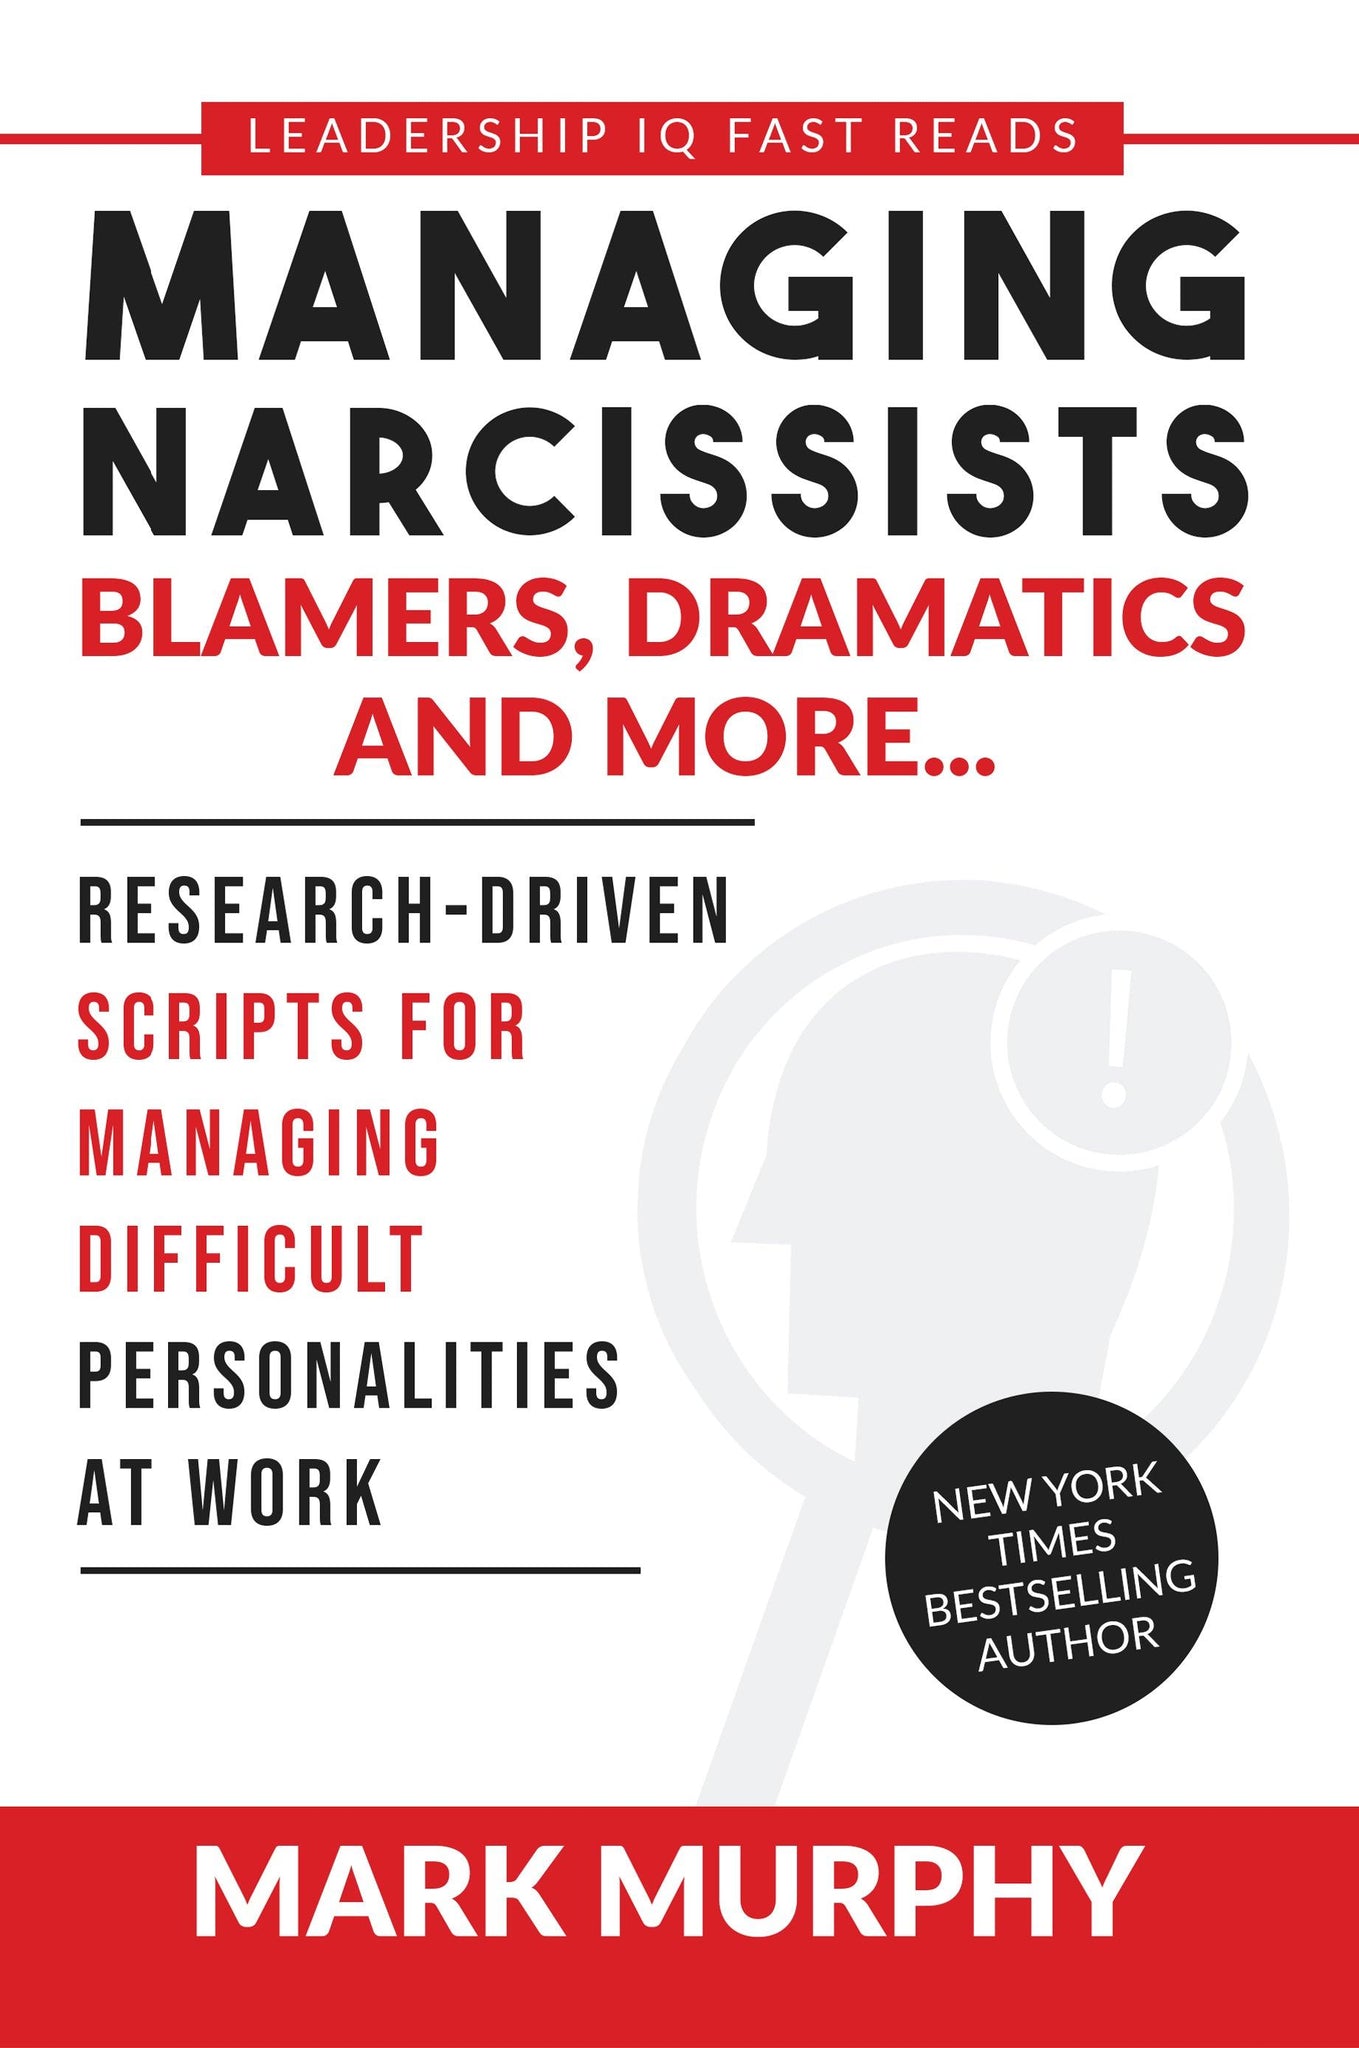 One-Time Book Offer: Managing Narcissists, Blamers, Dramatics and More [PDF DOWNLOAD] - Leadership IQ